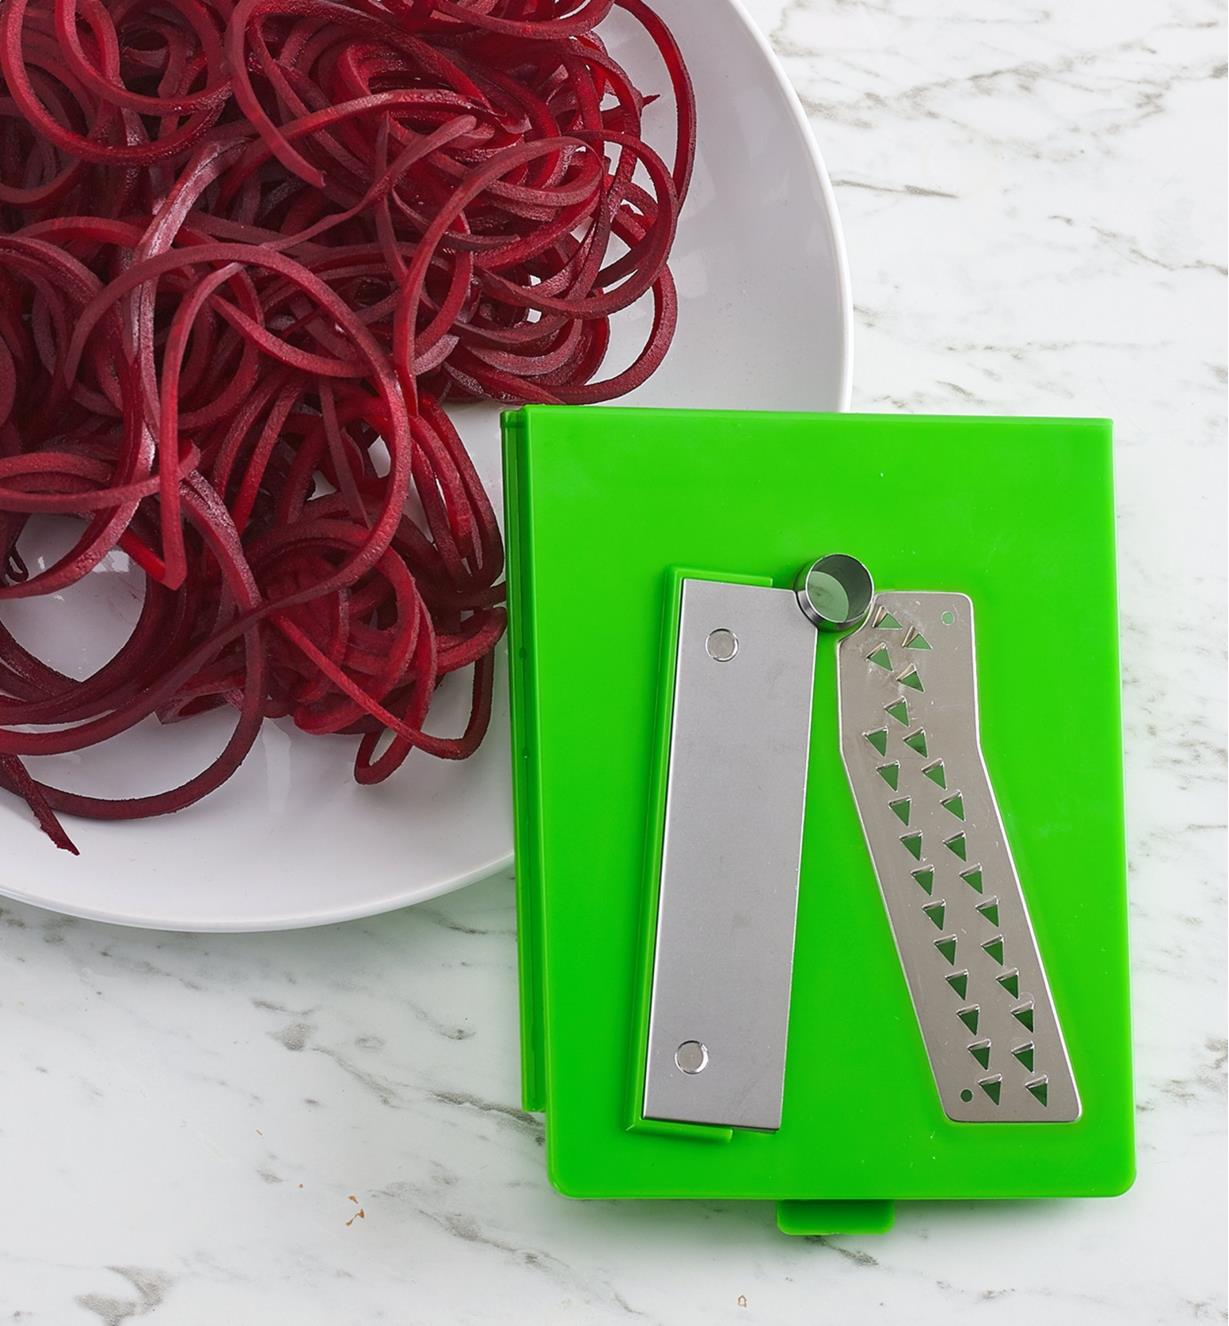 1/8" spaghetti-cut blade from the tabletop spiralizer with spaghetti-cut beets